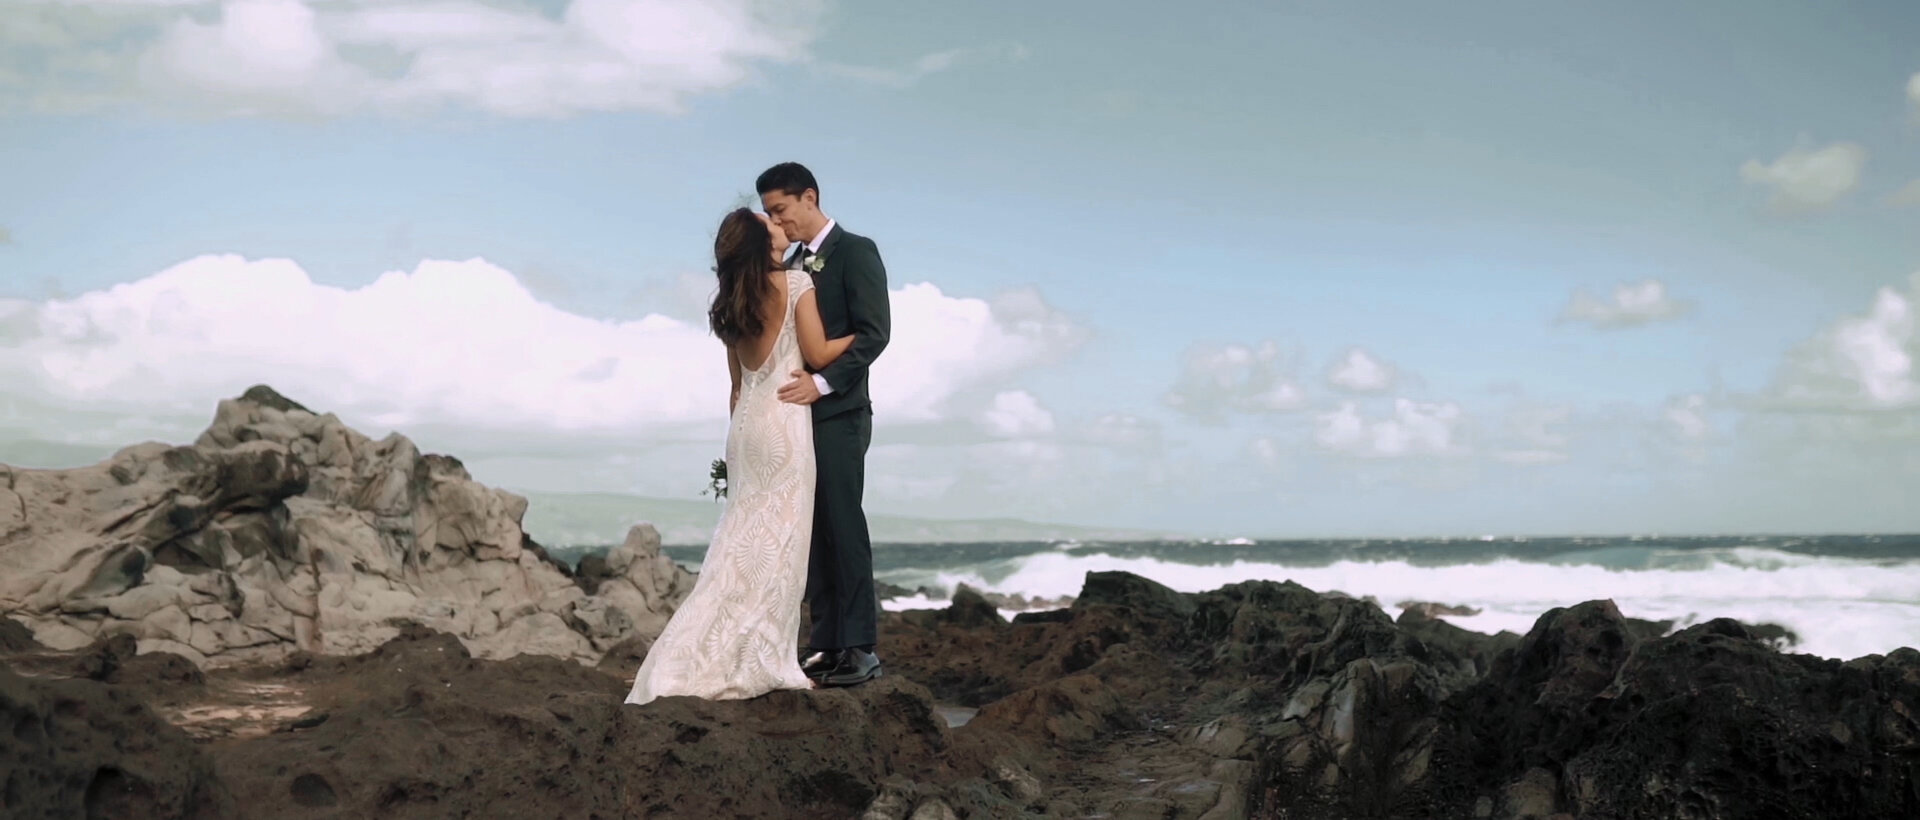 Bride and groom at Ironwoods Beach Cliffs by the ocean